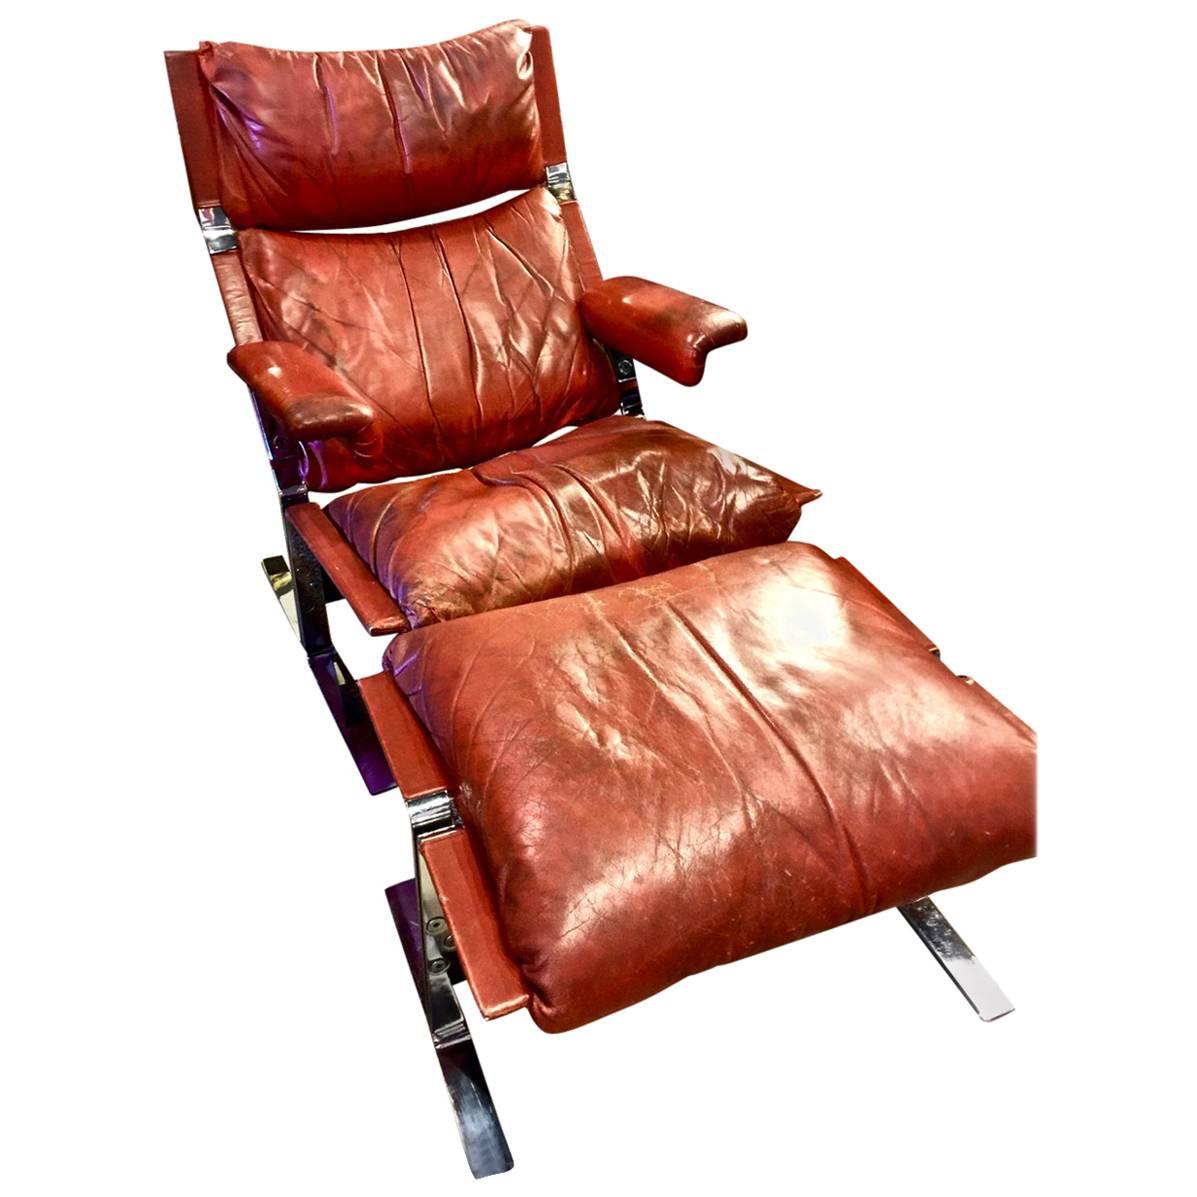 This an original Saporiti lounge chair and ottoman in its original rusty red supple Italian leather. The leather has acquired a lush patina; the chrome is original and in very good overall condition with no pitting or losses.